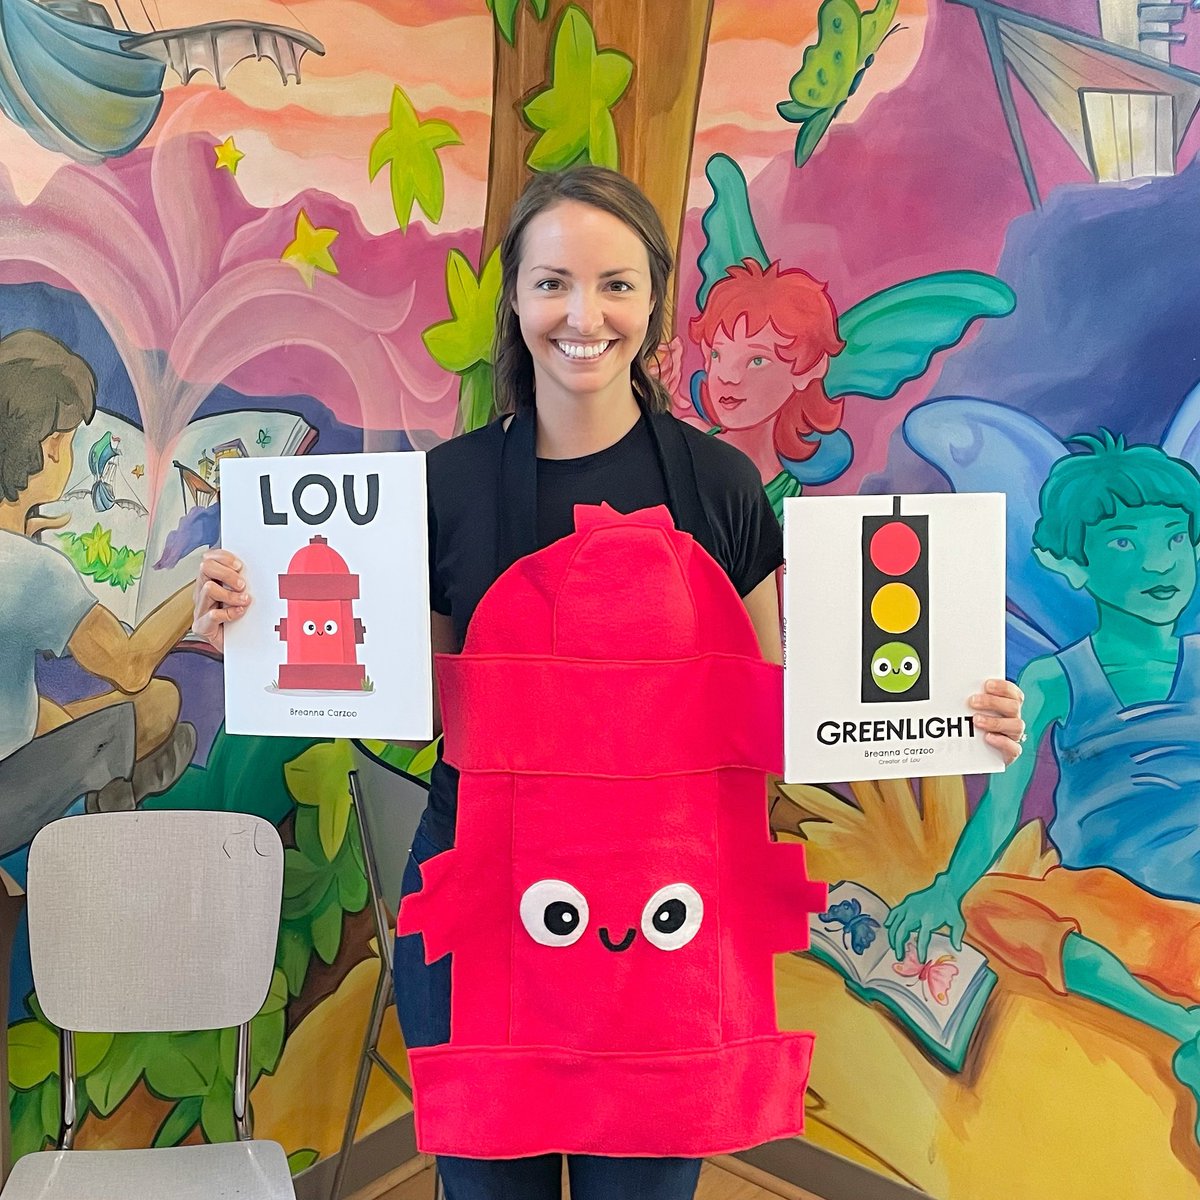 Did I wear my hand sewn LOU costume to the LOU & GREENLIGHT storytime today at @BookPeople ? Yes I did 😂 Reading LOU to kids who knew the book was delightful! Their reactions&commentary were THE BEST! And it was my first time sharing GREENLIGHT! Thanks for having me BookPeople!